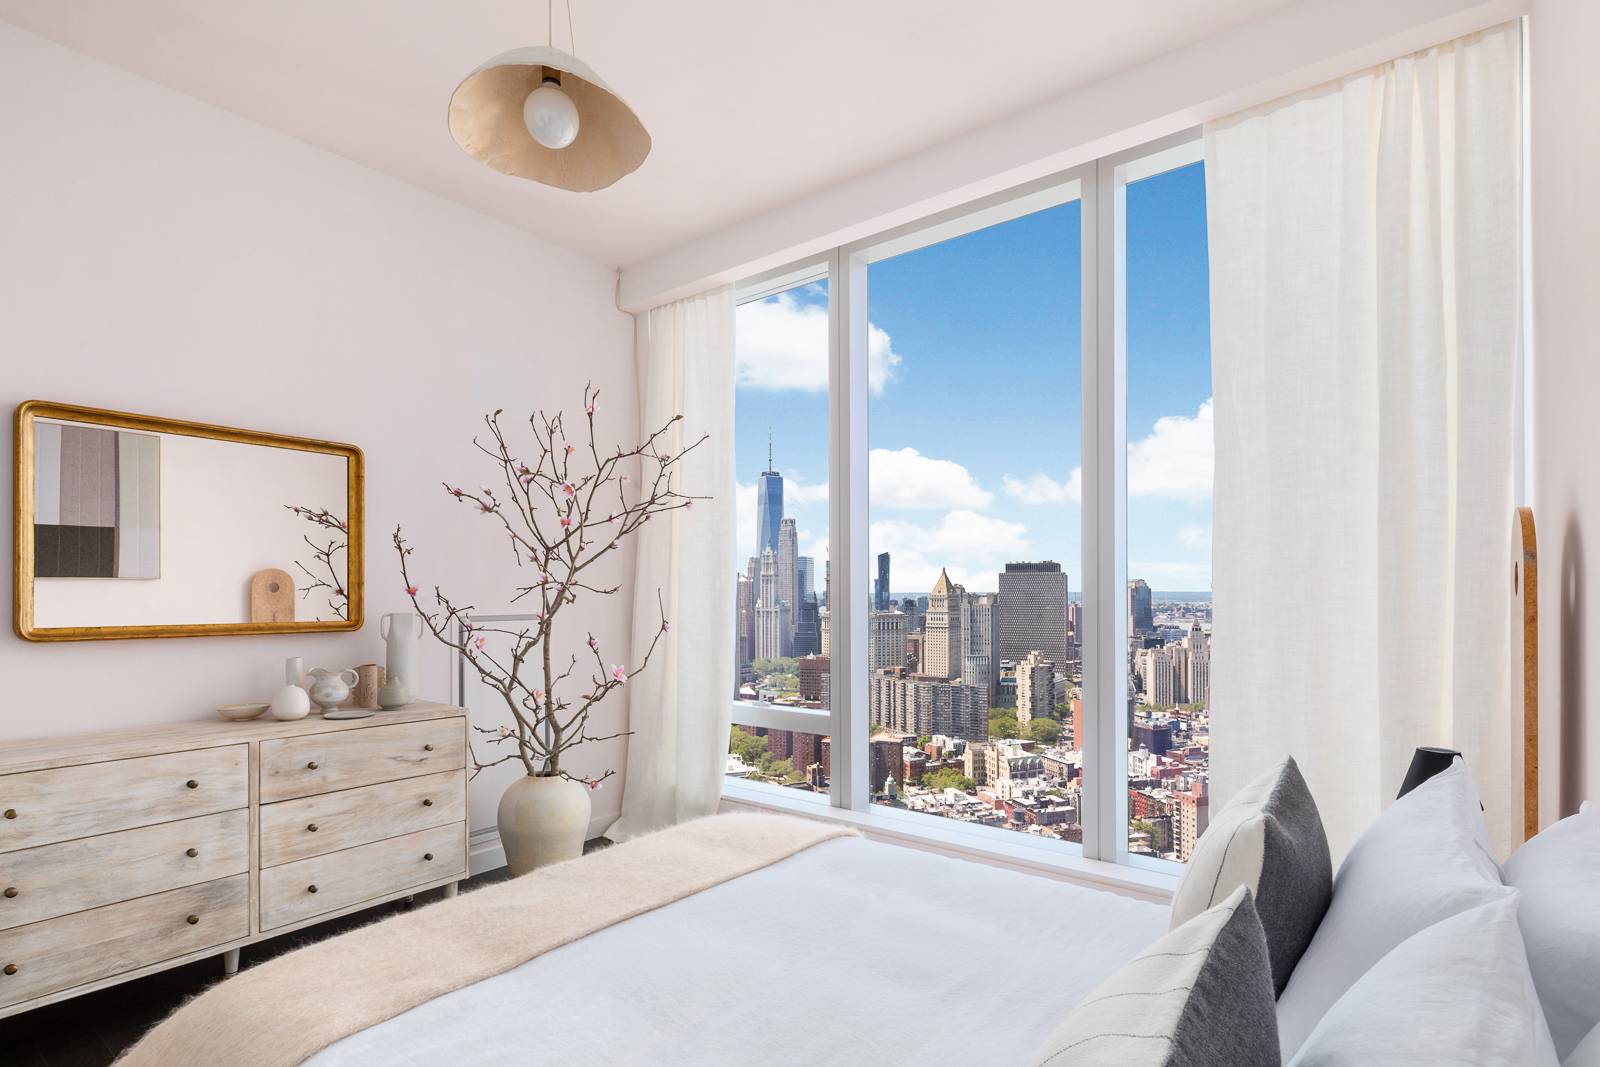 ONE MANHATTAN SQUARE OFFERS ONE OF THE LAST 20 YEAR TAX ABATEMENTS AVAILABLE IN NEW YORK CITY Residence 22A is a 1, 162 square foot two bedroom, two bathroom with ...